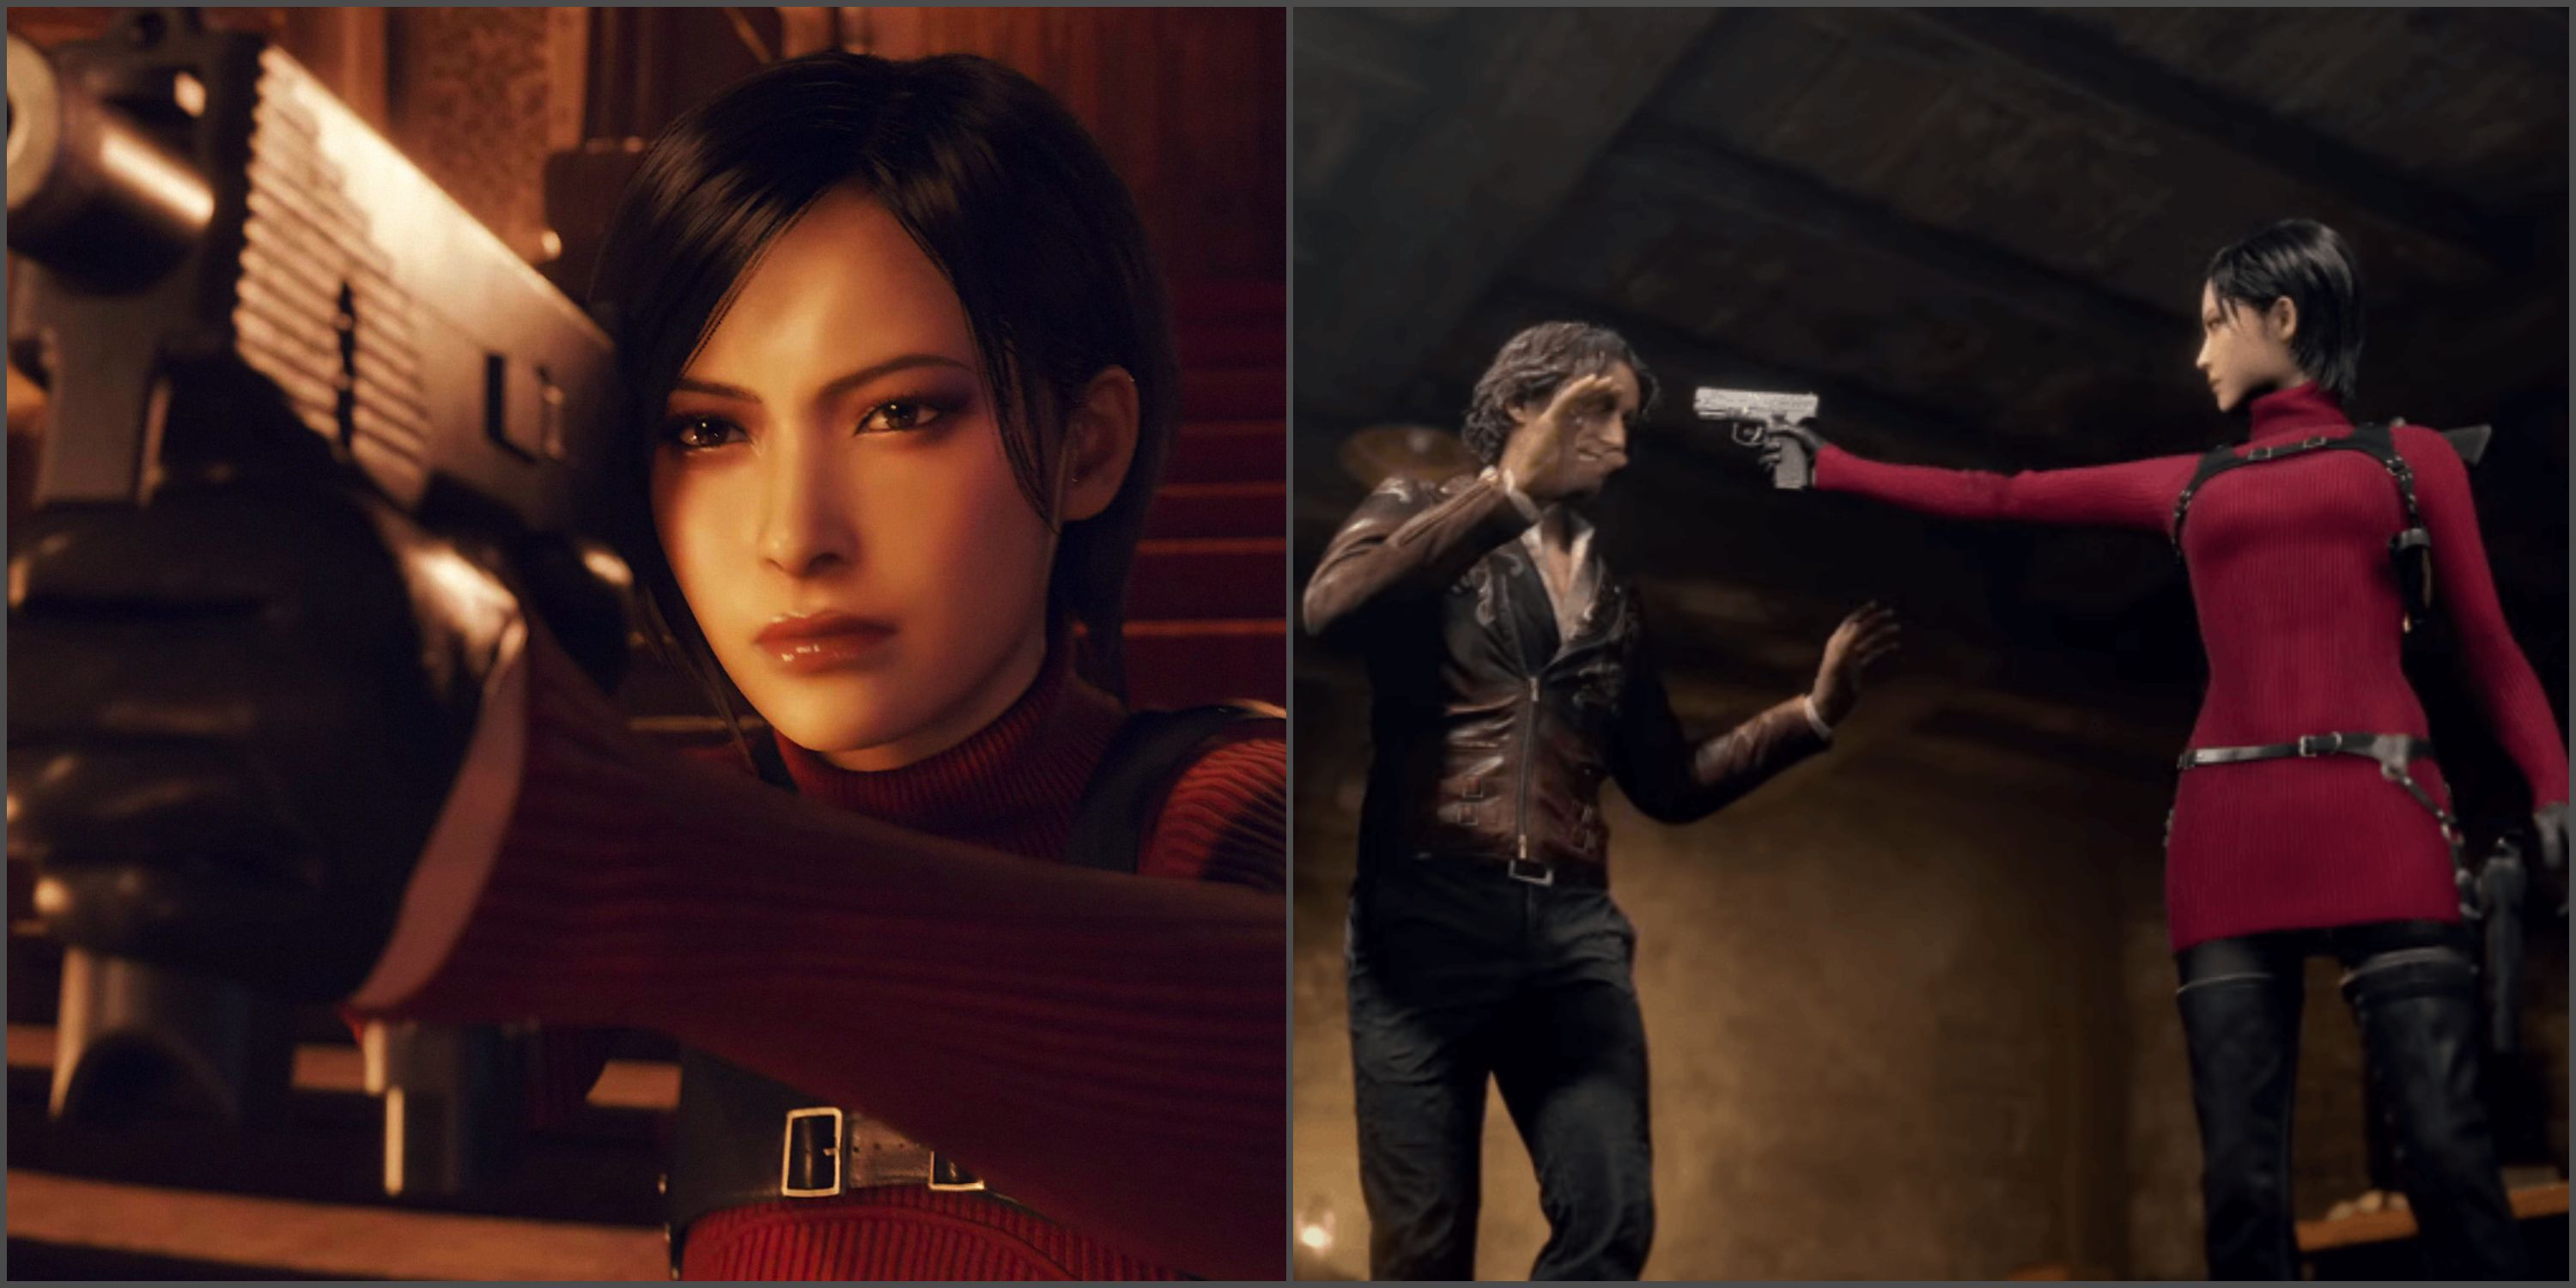 These Resident Evil 2 mods replace Leon and Claire with Geralt and